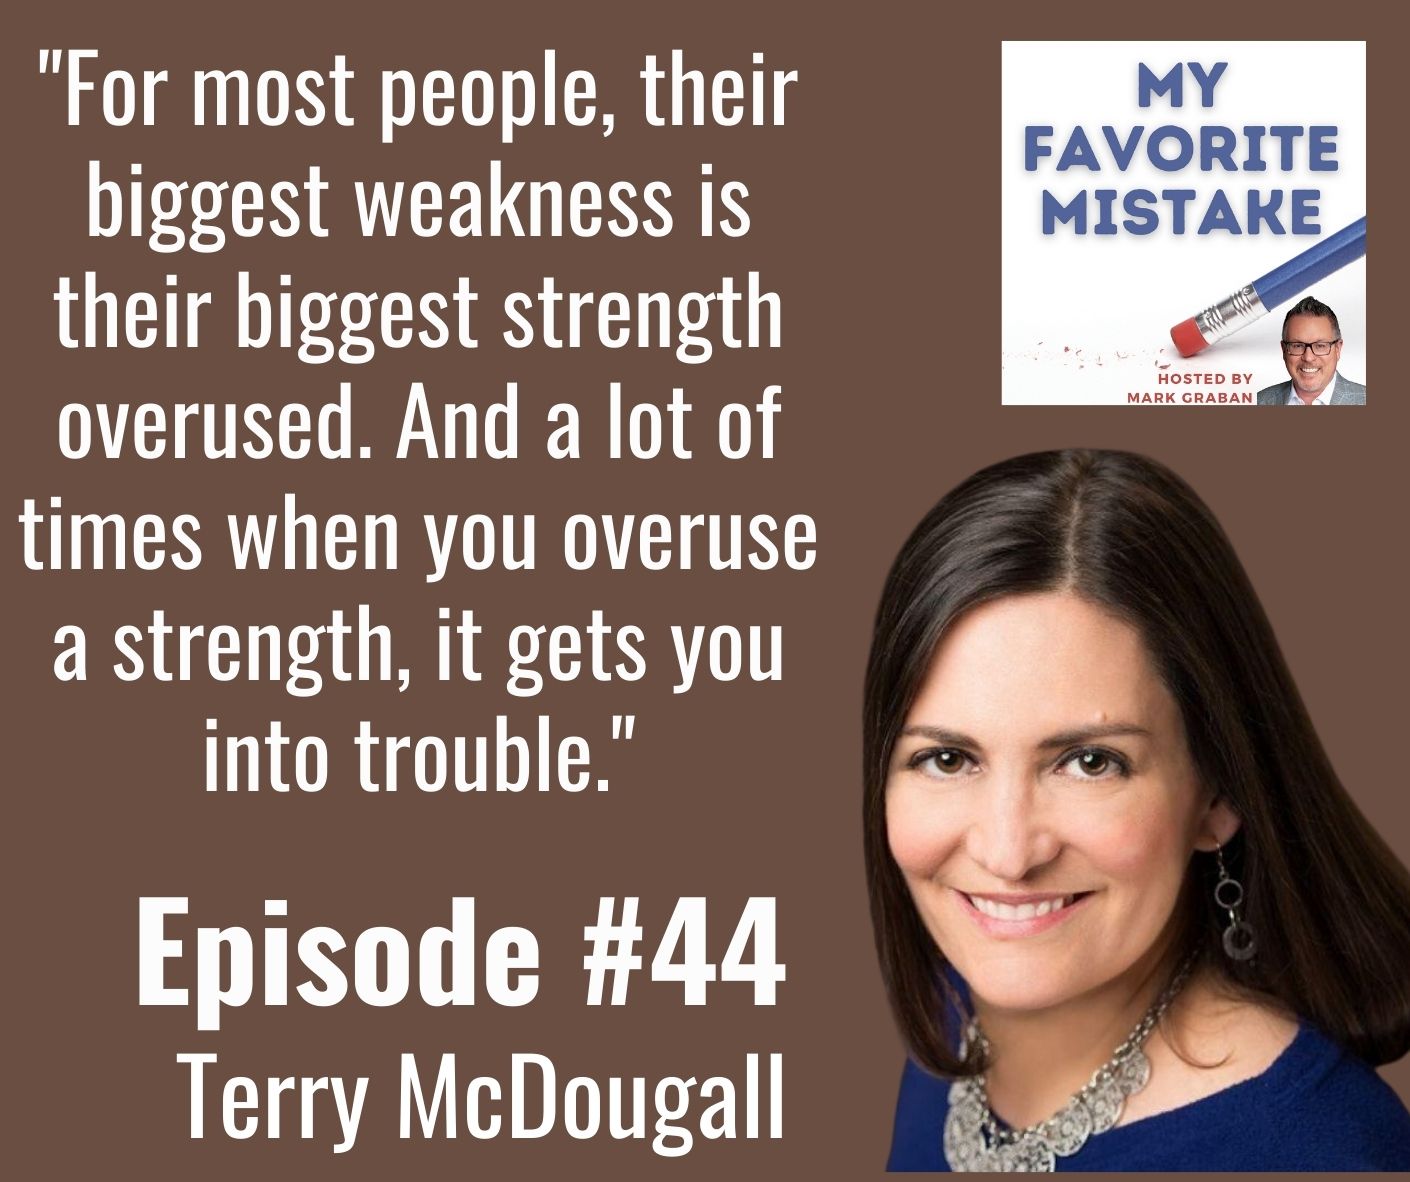 "For most people, their biggest weakness is their biggest strength overused. And a lot of times when you overuse a strength, it gets you into trouble."